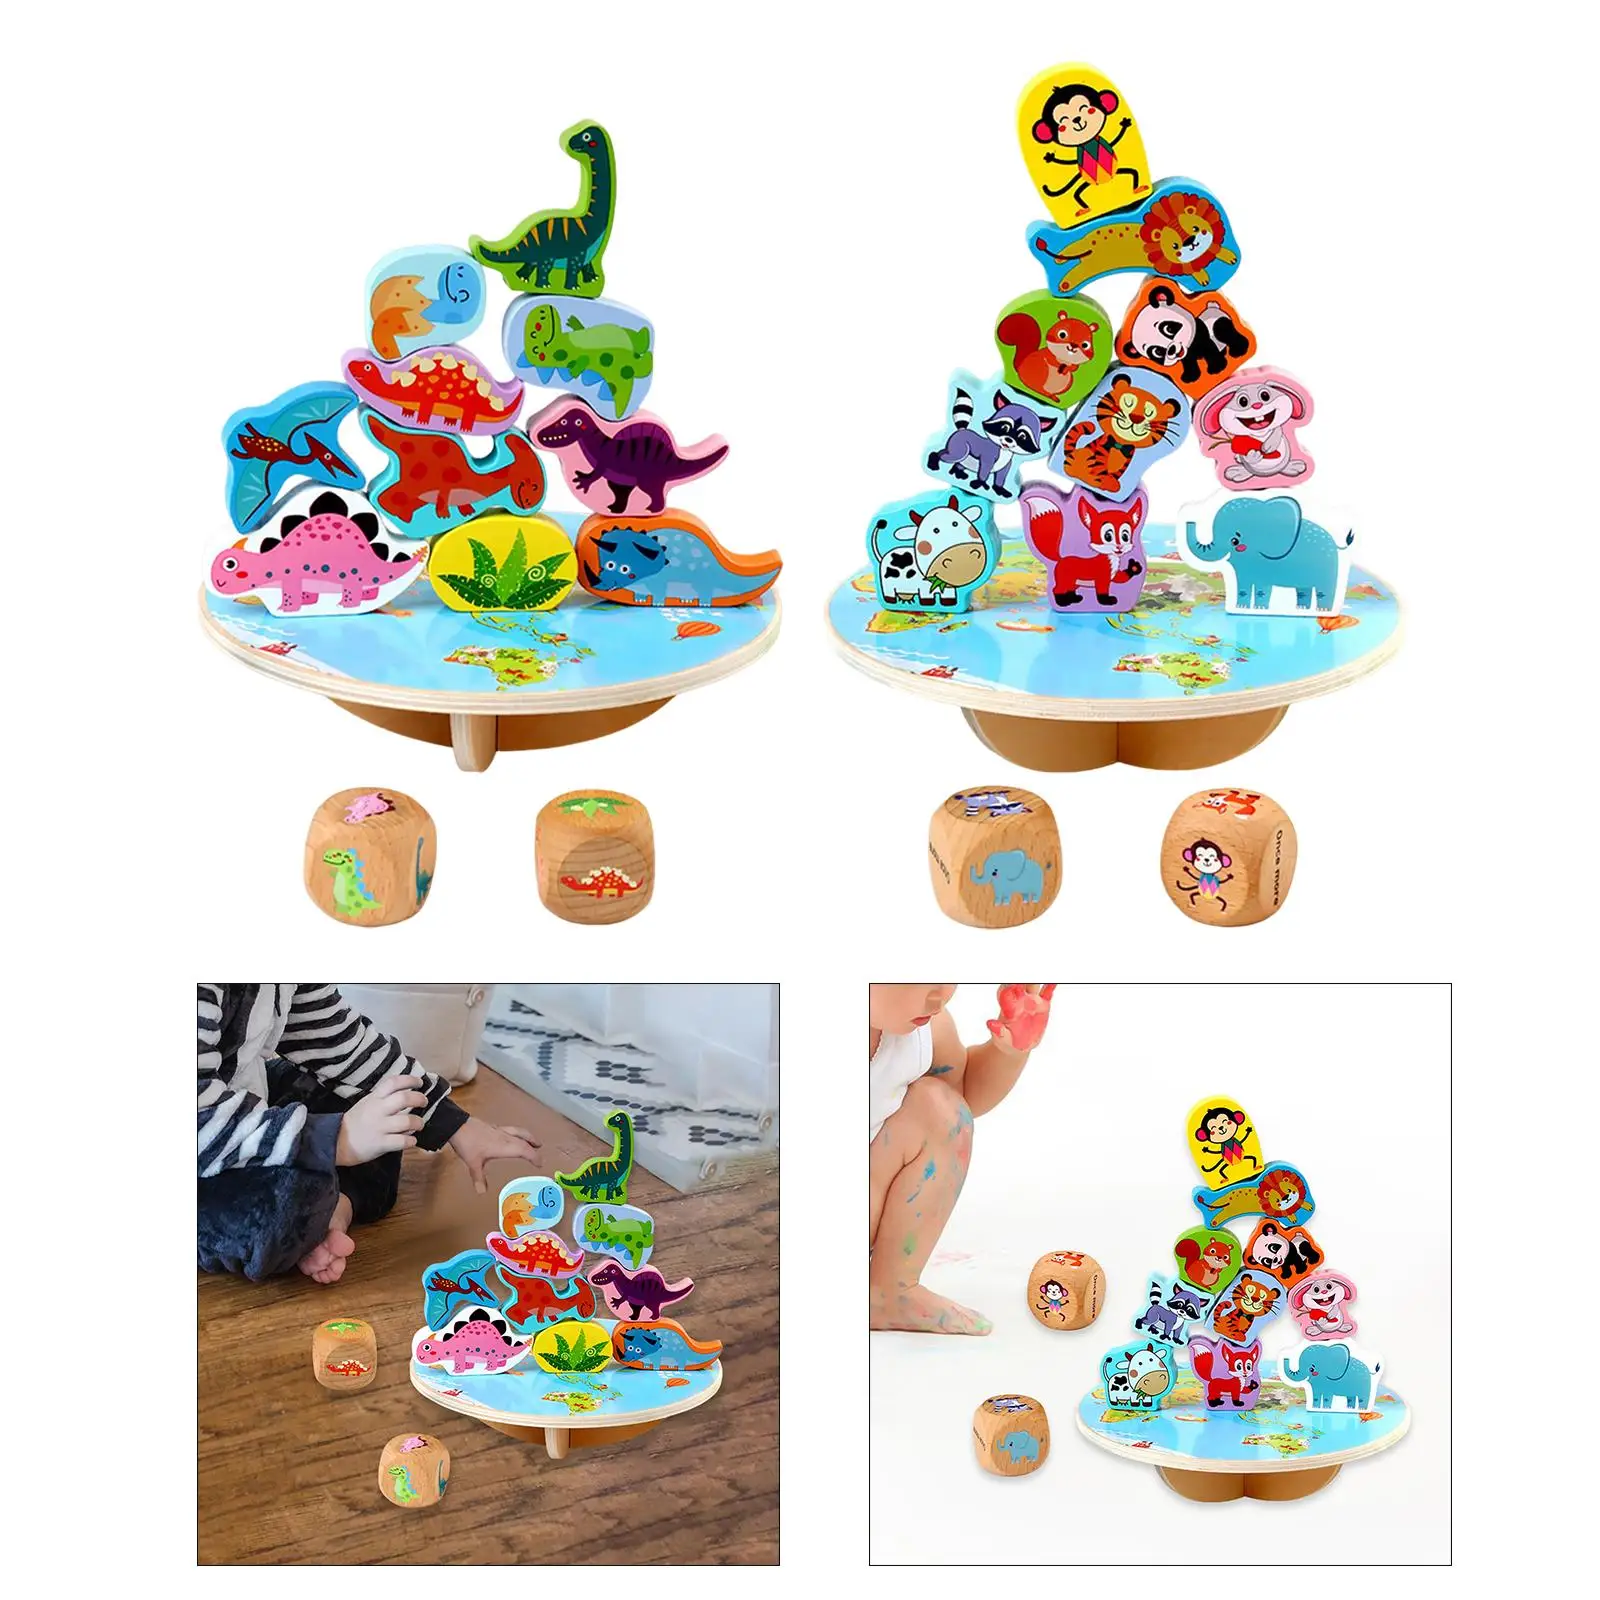 Wooden Balancing Puzzle Early Educational Toy Toys Skill Motors Balancing Blocks Activity Puzzles for Children Kids